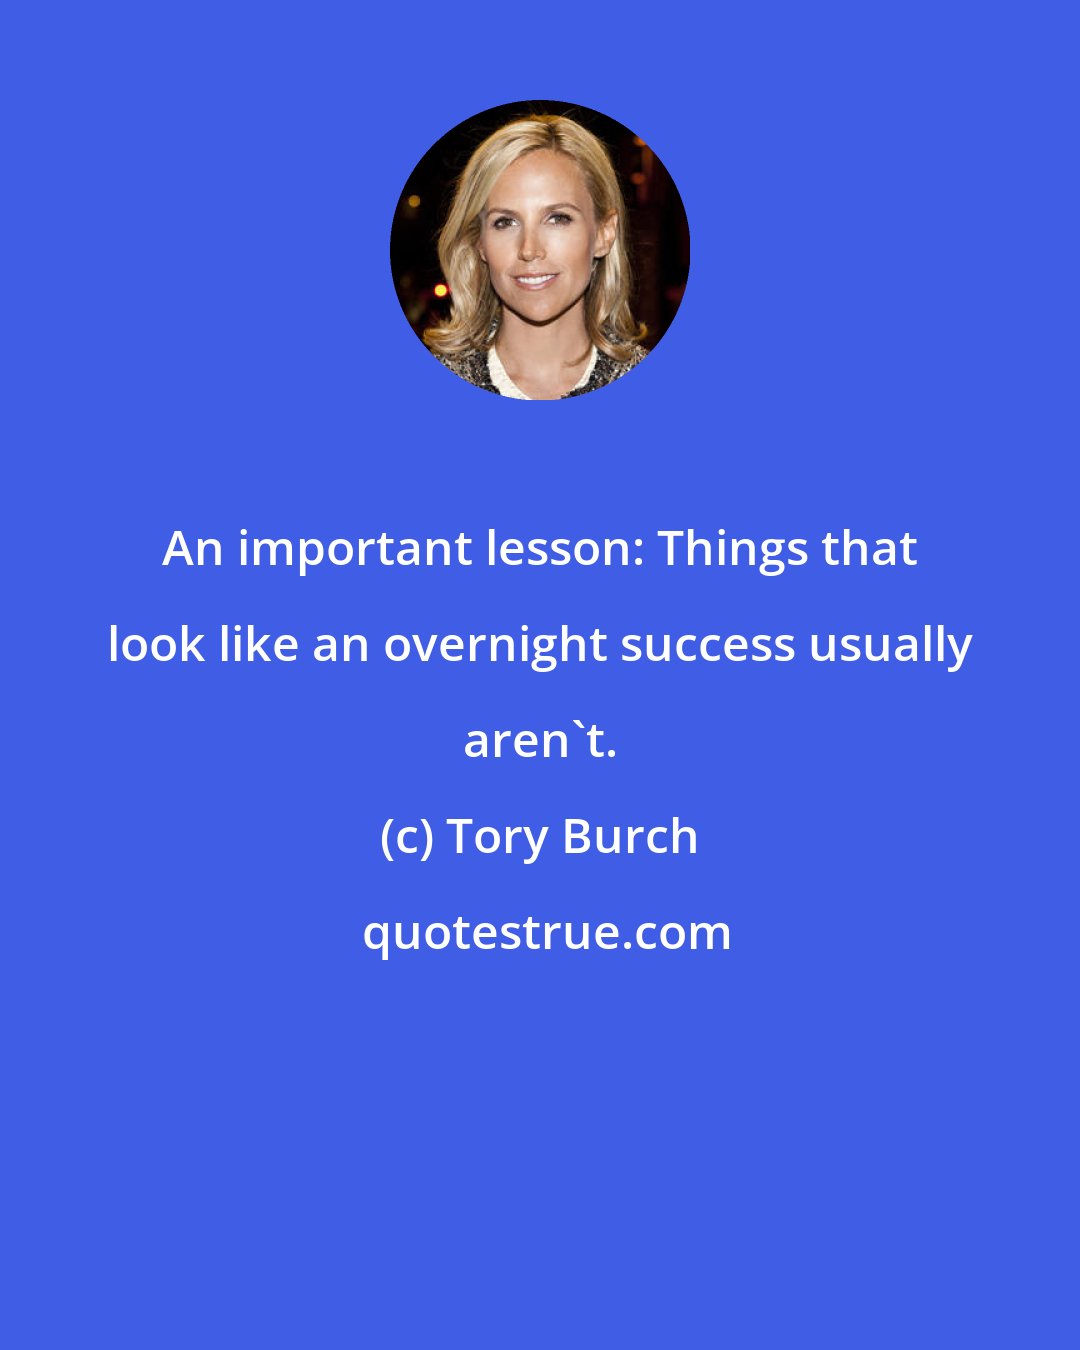 Tory Burch: An important lesson: Things that look like an overnight success usually aren't.